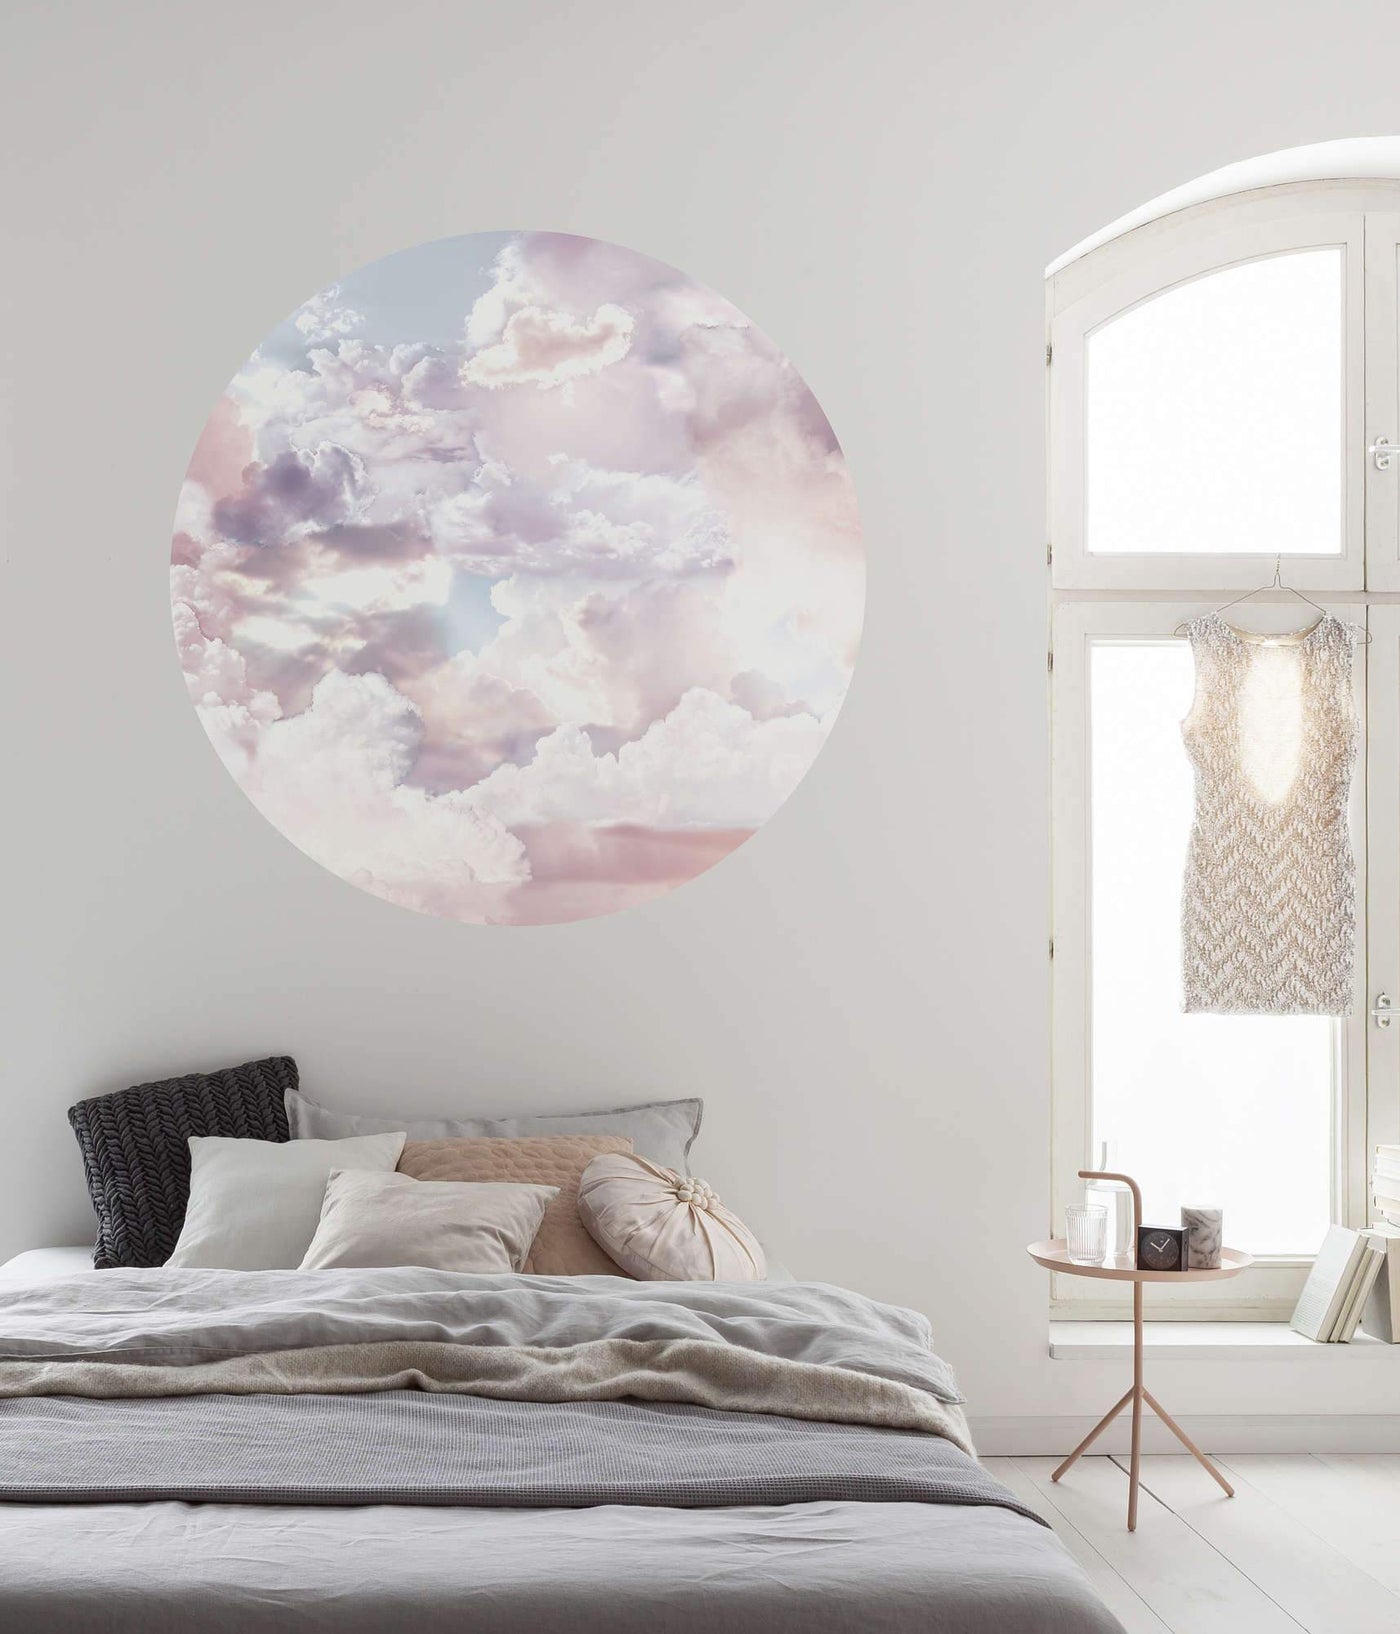 Pastel Sky Circle Wall Art (Self-Adhesive)-Wall Decor-ABSTRACT WALLPAPERS, ART WALLPAPER, CIRCLE WALL ART, ECO MURALS, NATURE WALL ART, PATTERN WALLPAPERS, SUSTAINABLE DECOR-Forest Homes-Nature inspired decor-Nature decor